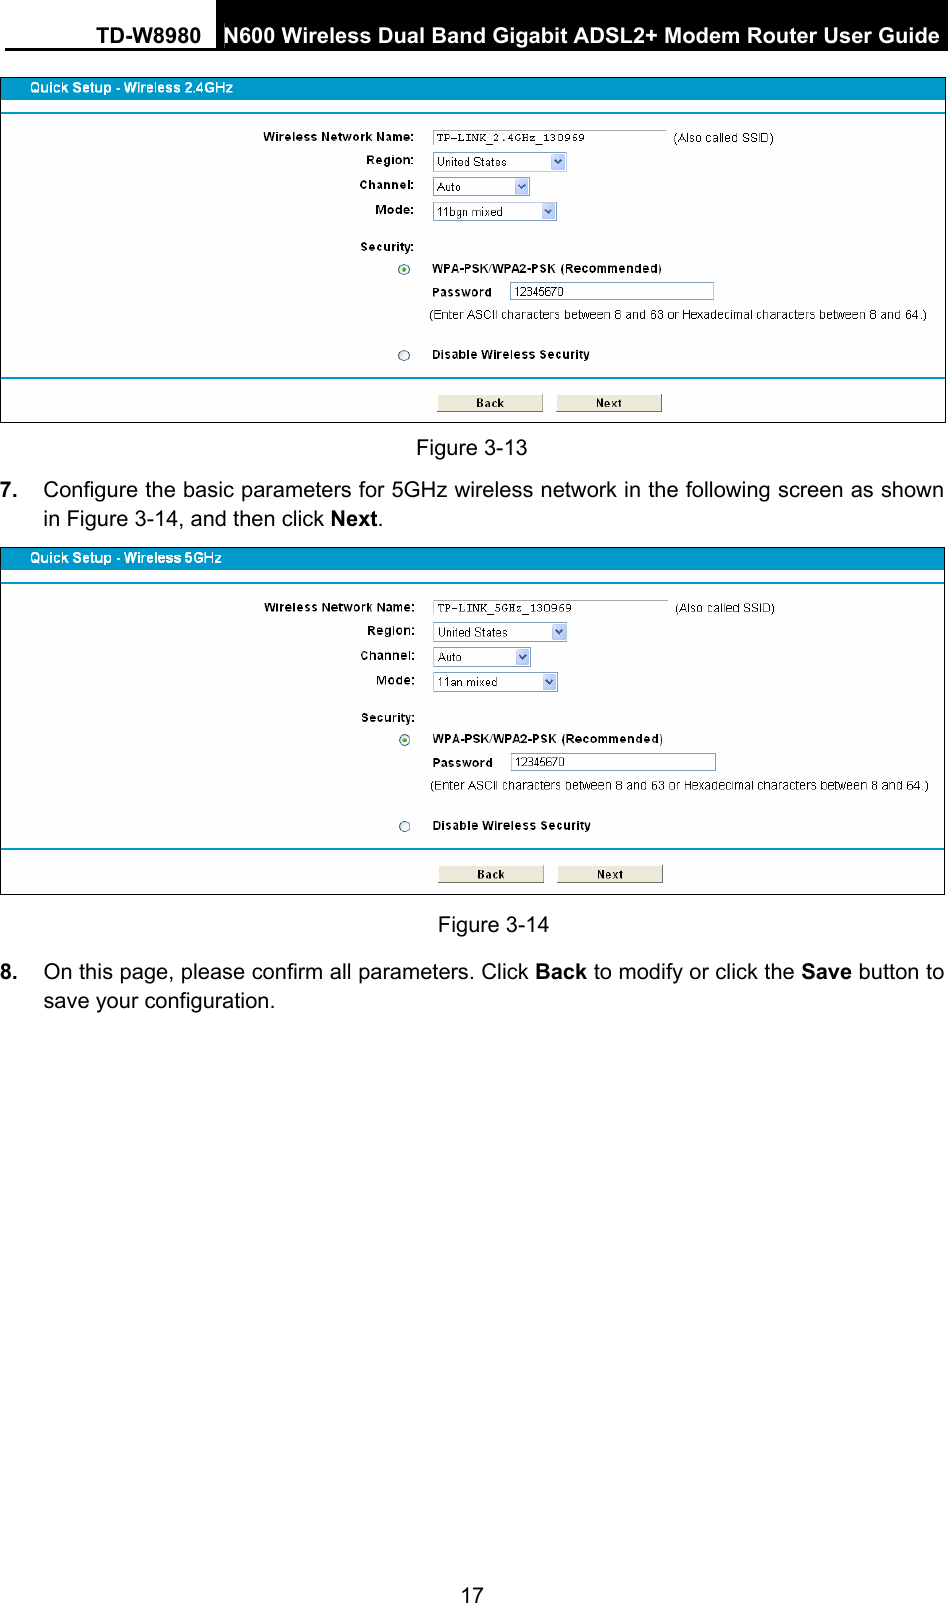 TD-W8980  N600 Wireless Dual Band Gigabit ADSL2+ Modem Router User Guide 17  Figure 3-13 7.  Configure the basic parameters for 5GHz wireless network in the following screen as shown in Figure 3-14, and then click Next.  Figure 3-14 8.  On this page, please confirm all parameters. Click Back to modify or click the Save button to save your configuration. 